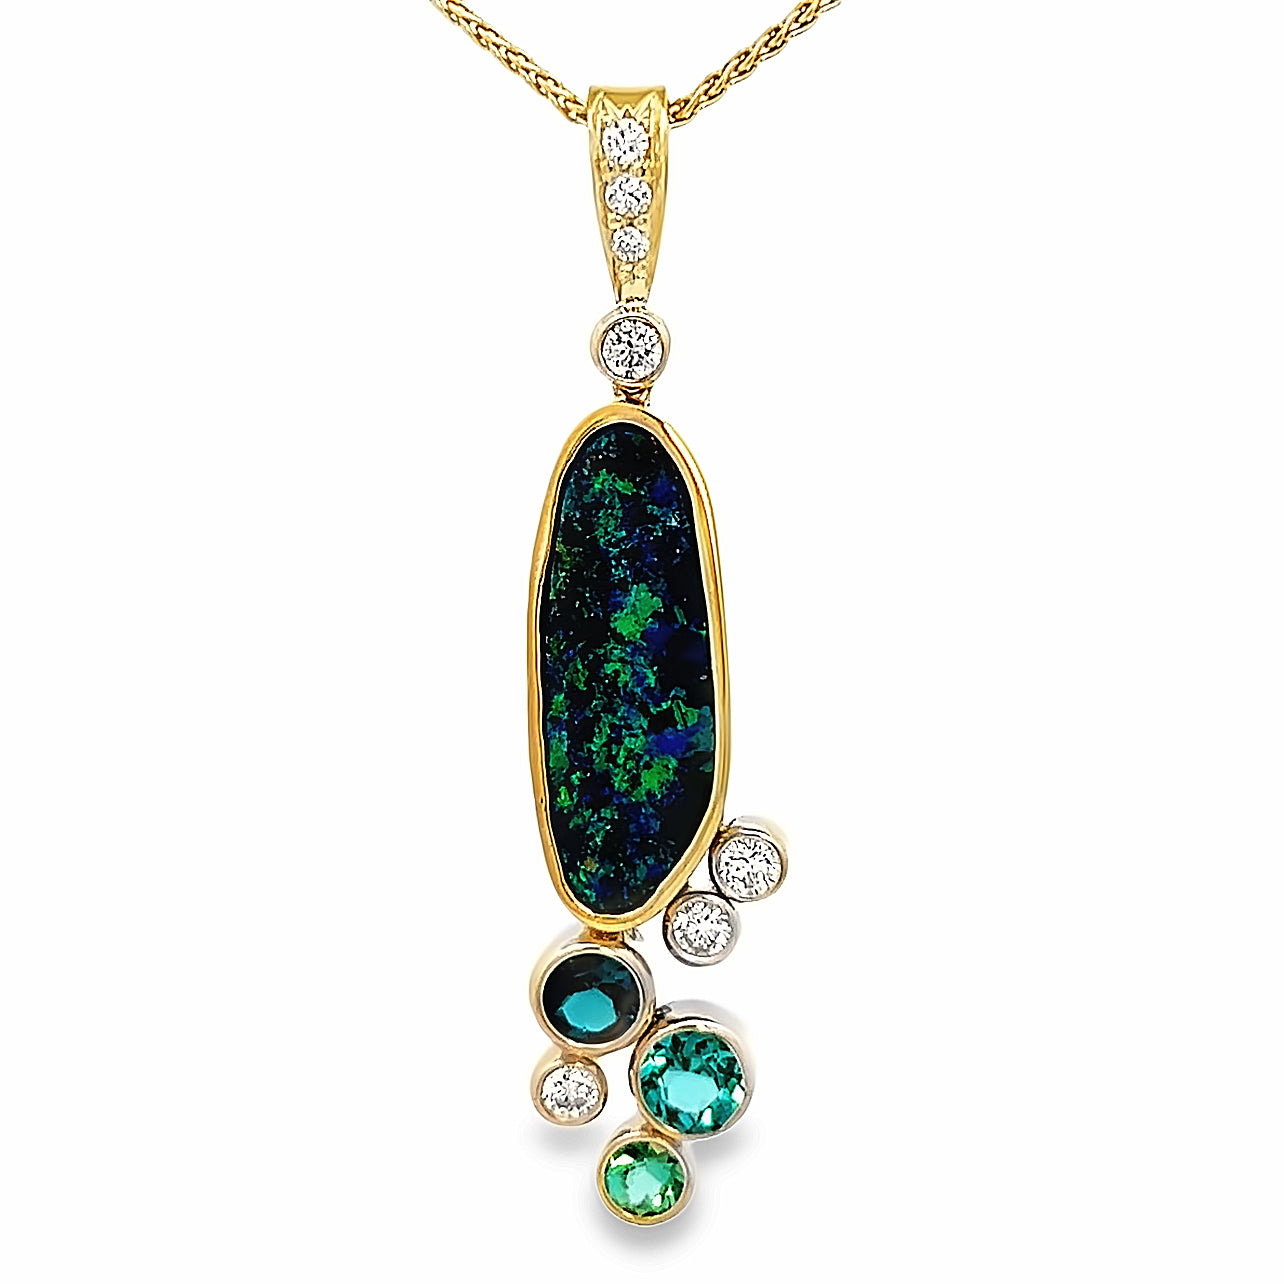 18k Yellow Gold and 14k White Gold Opal, Tourmaline and Diamond Pendant by Paul Richter 4.40ct.)